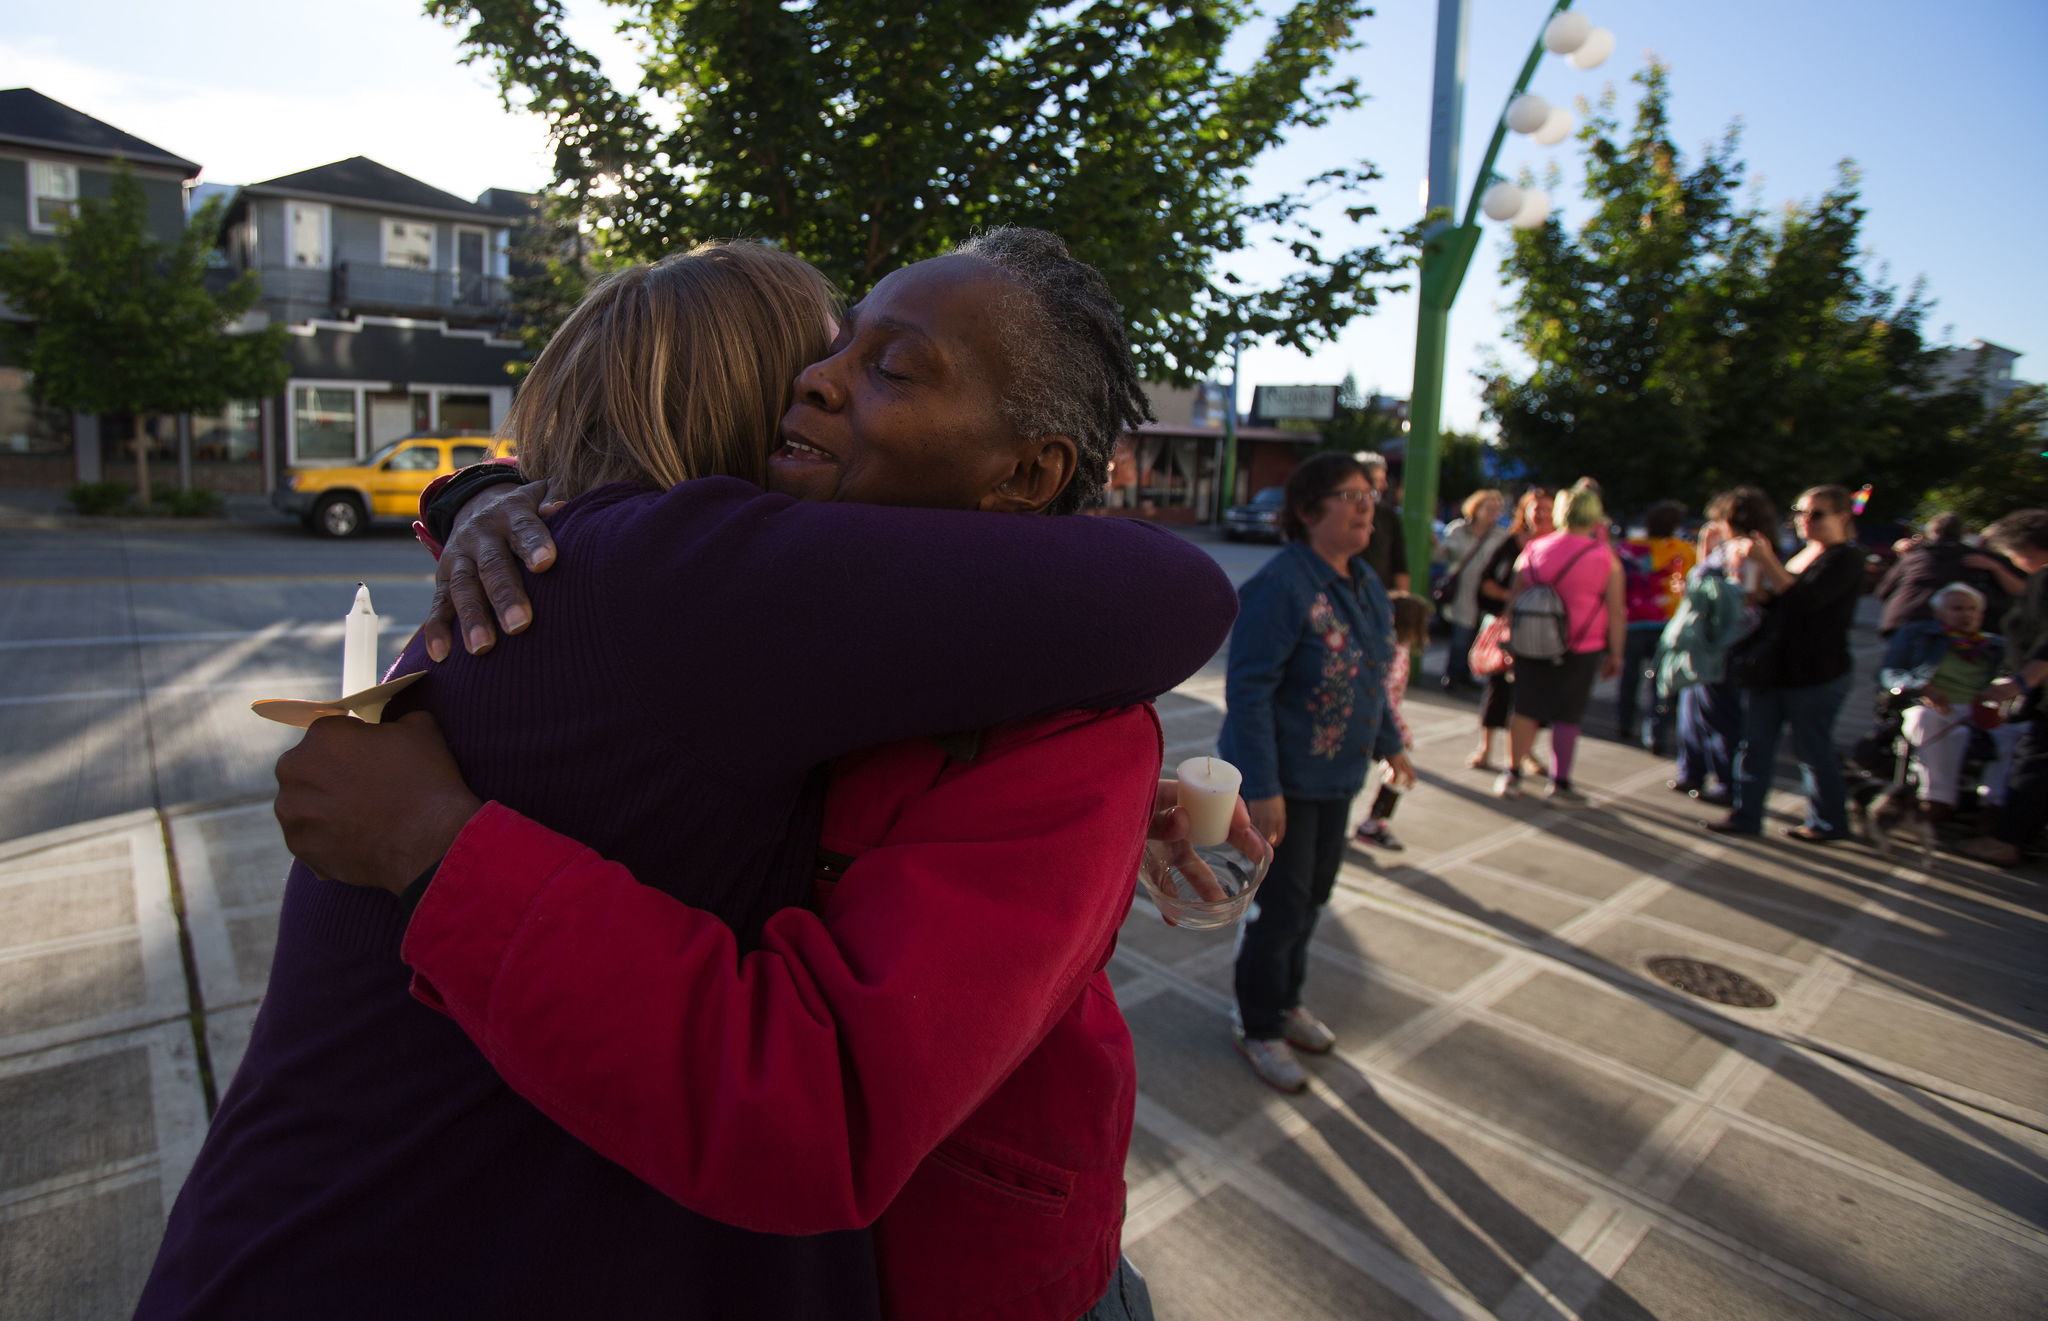 Amman Wilson hugs each of the 17 people who walked in memory of the victims of the Orlando, Florida, shootings on Wednesday through downtown Everett.